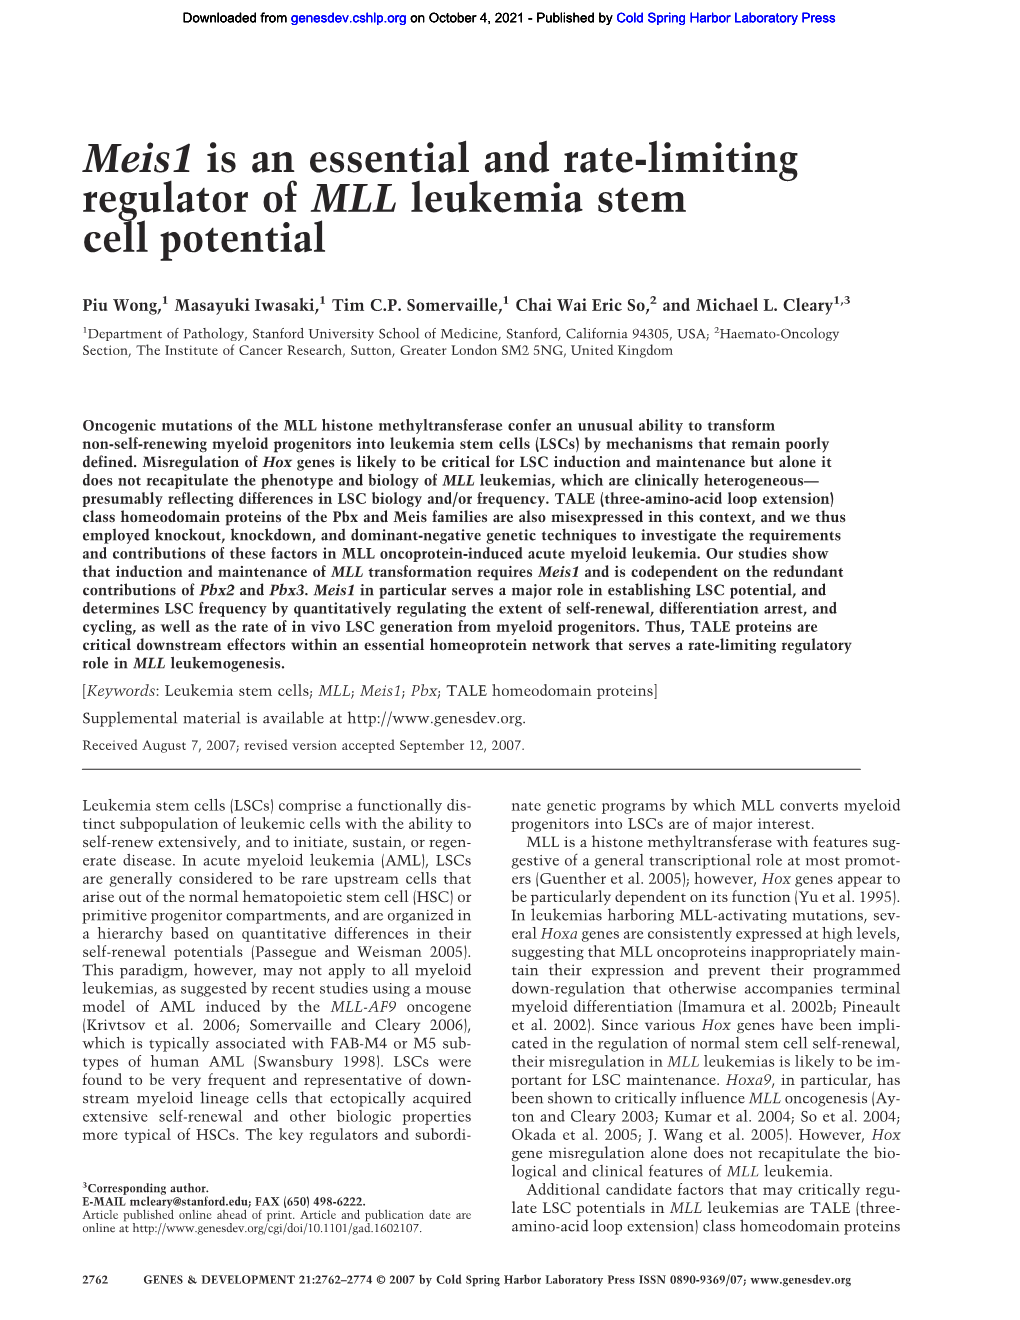 Meis1 Is an Essential and Rate-Limiting Regulator of MLL Leukemia Stem Cell Potential